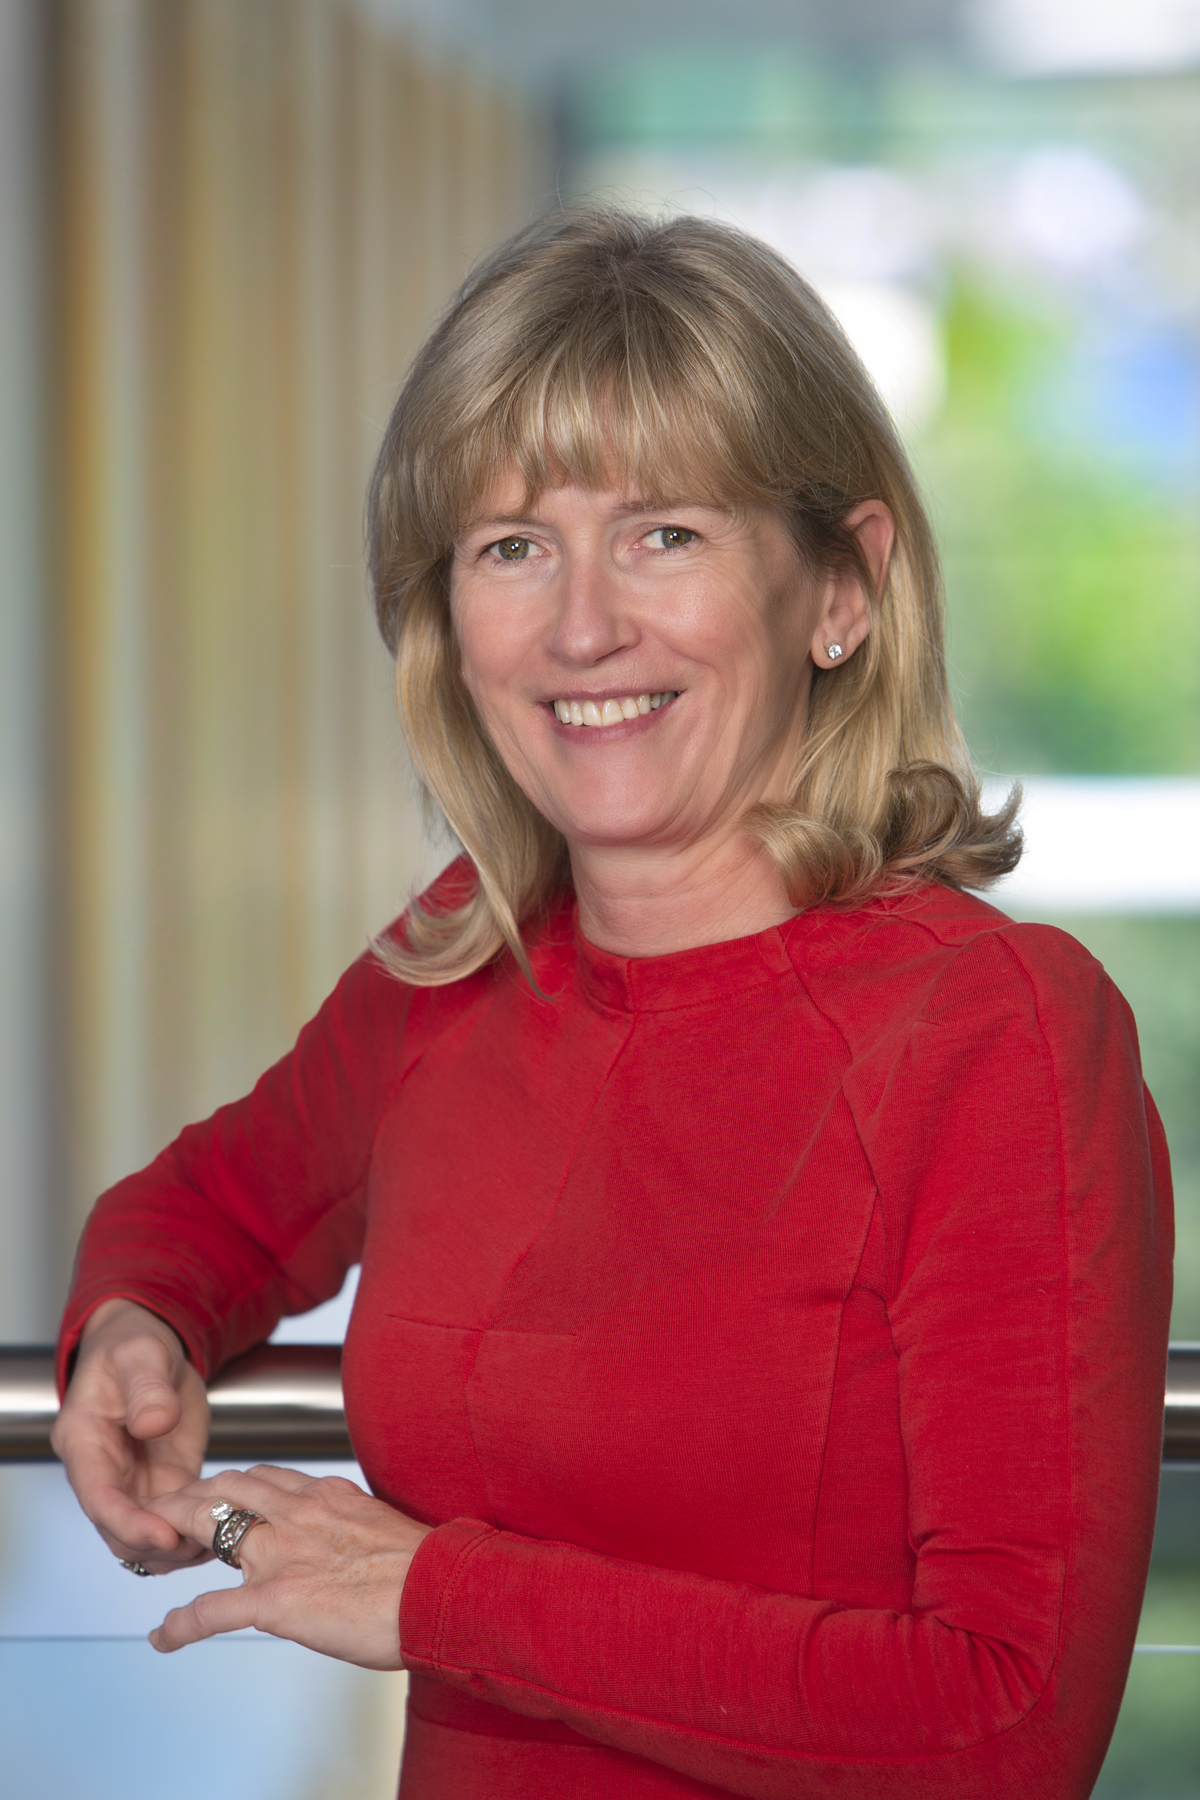 Professor Mary Horgan elected President of Royal College of Physicians Ireland